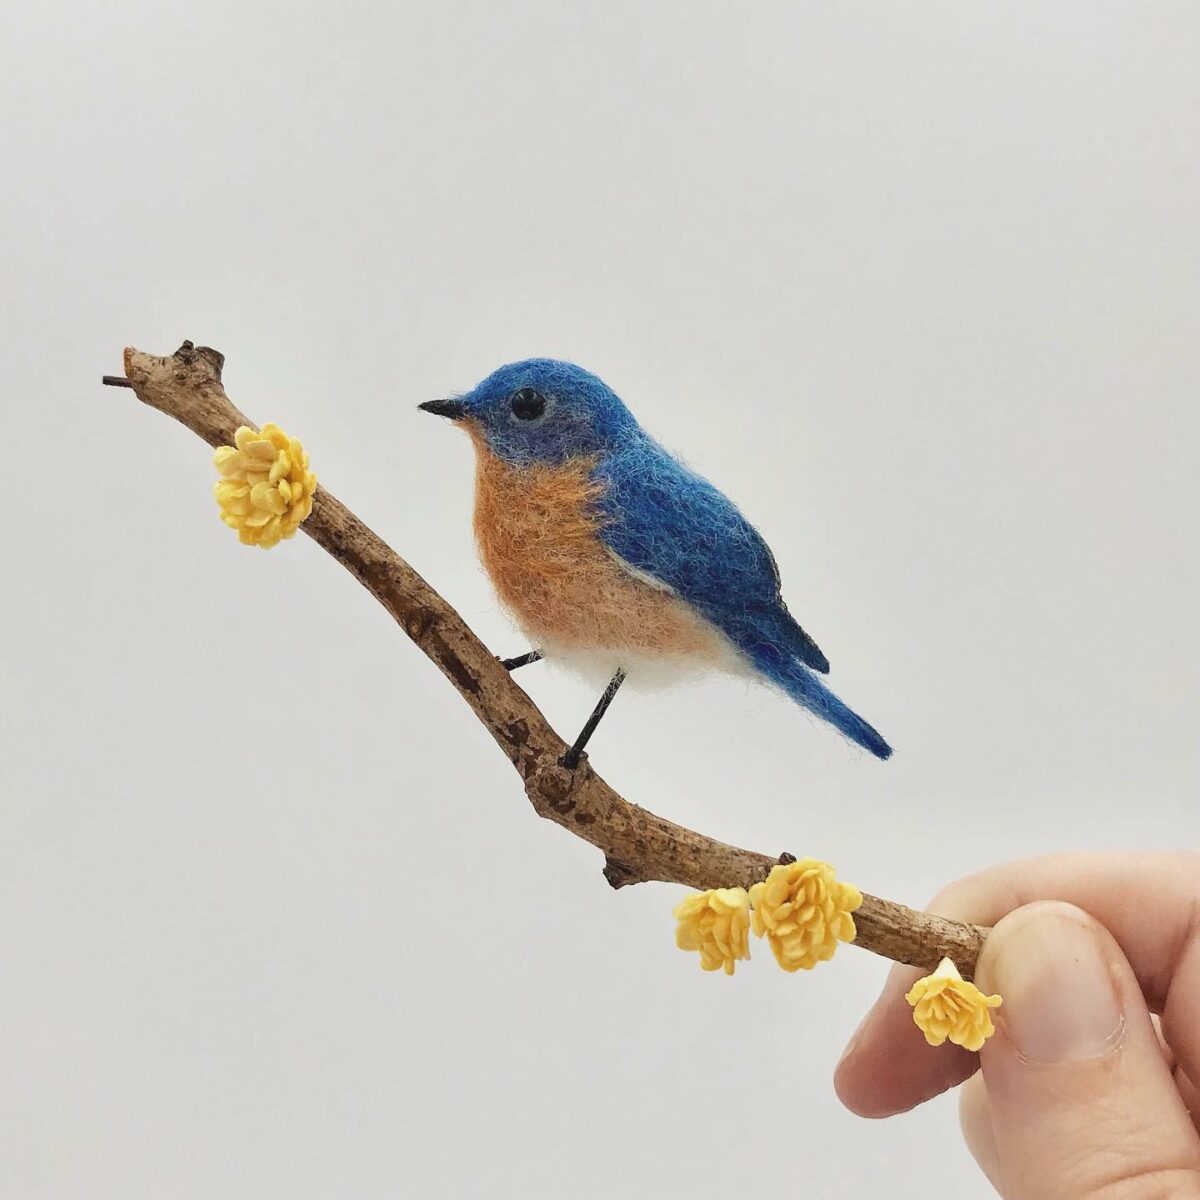 Felted Wildlife Gorgeous Miniature Animal Sculptures By Simon Brown And Katie Corrigan 11